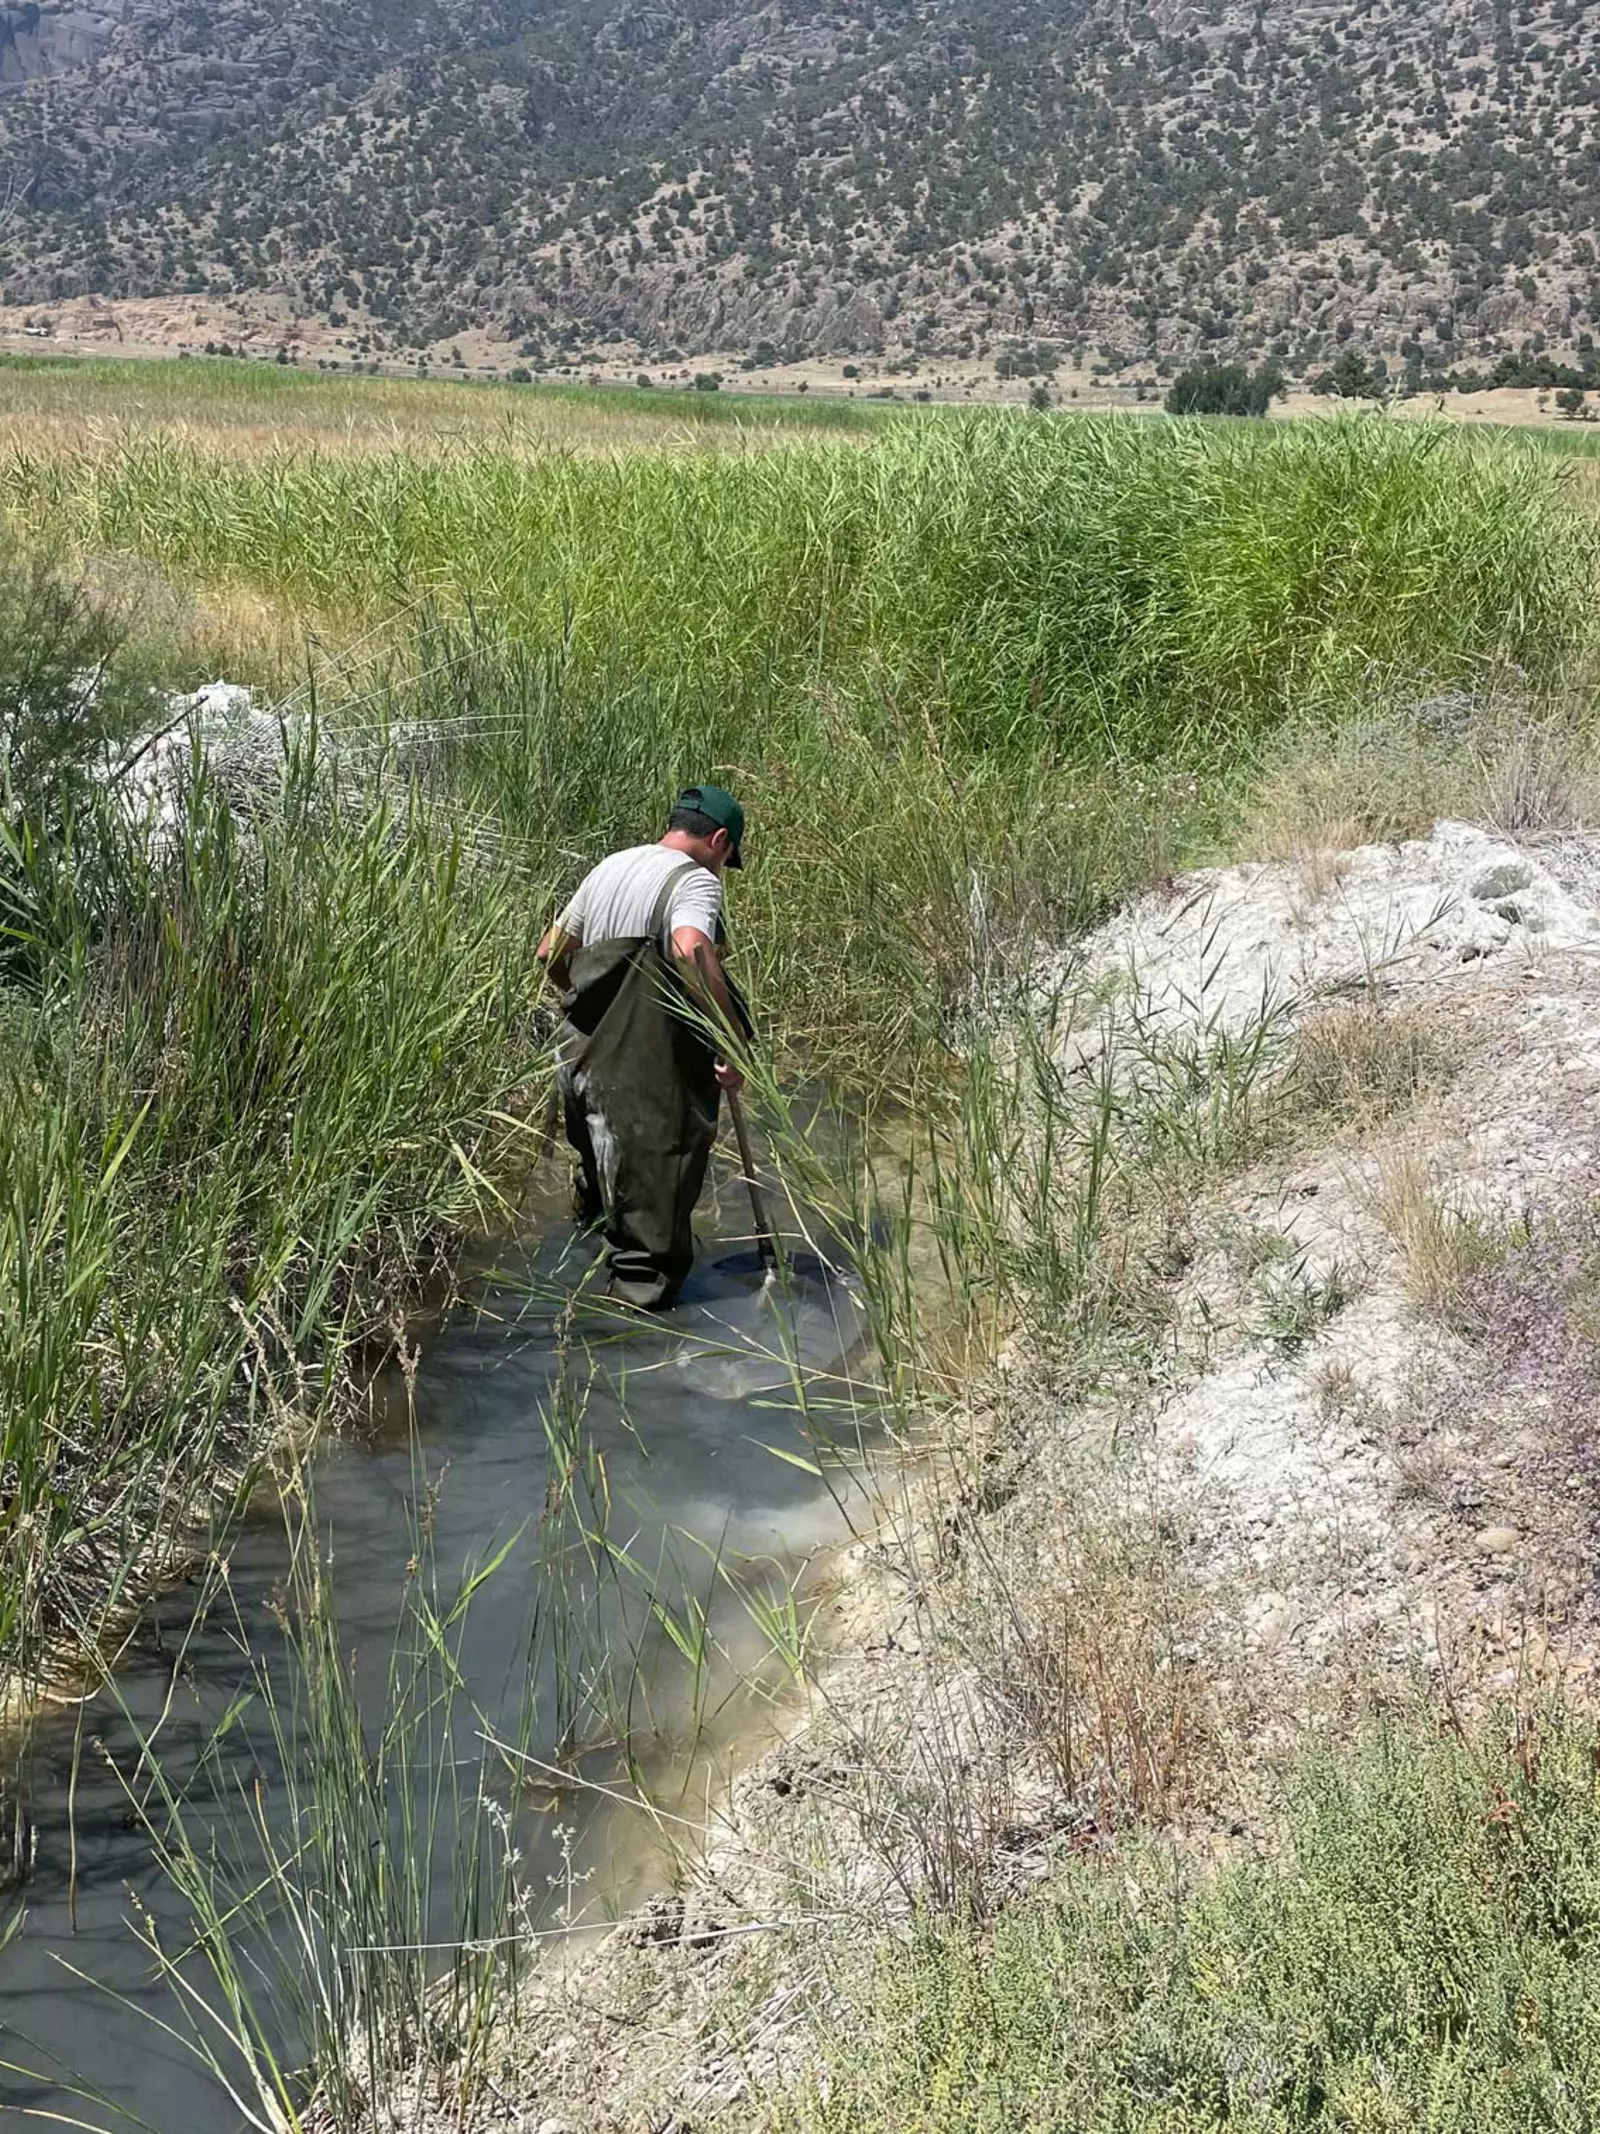 Whipsnade Zoo conservationist wading to find lake acigol killifish in Turkey.